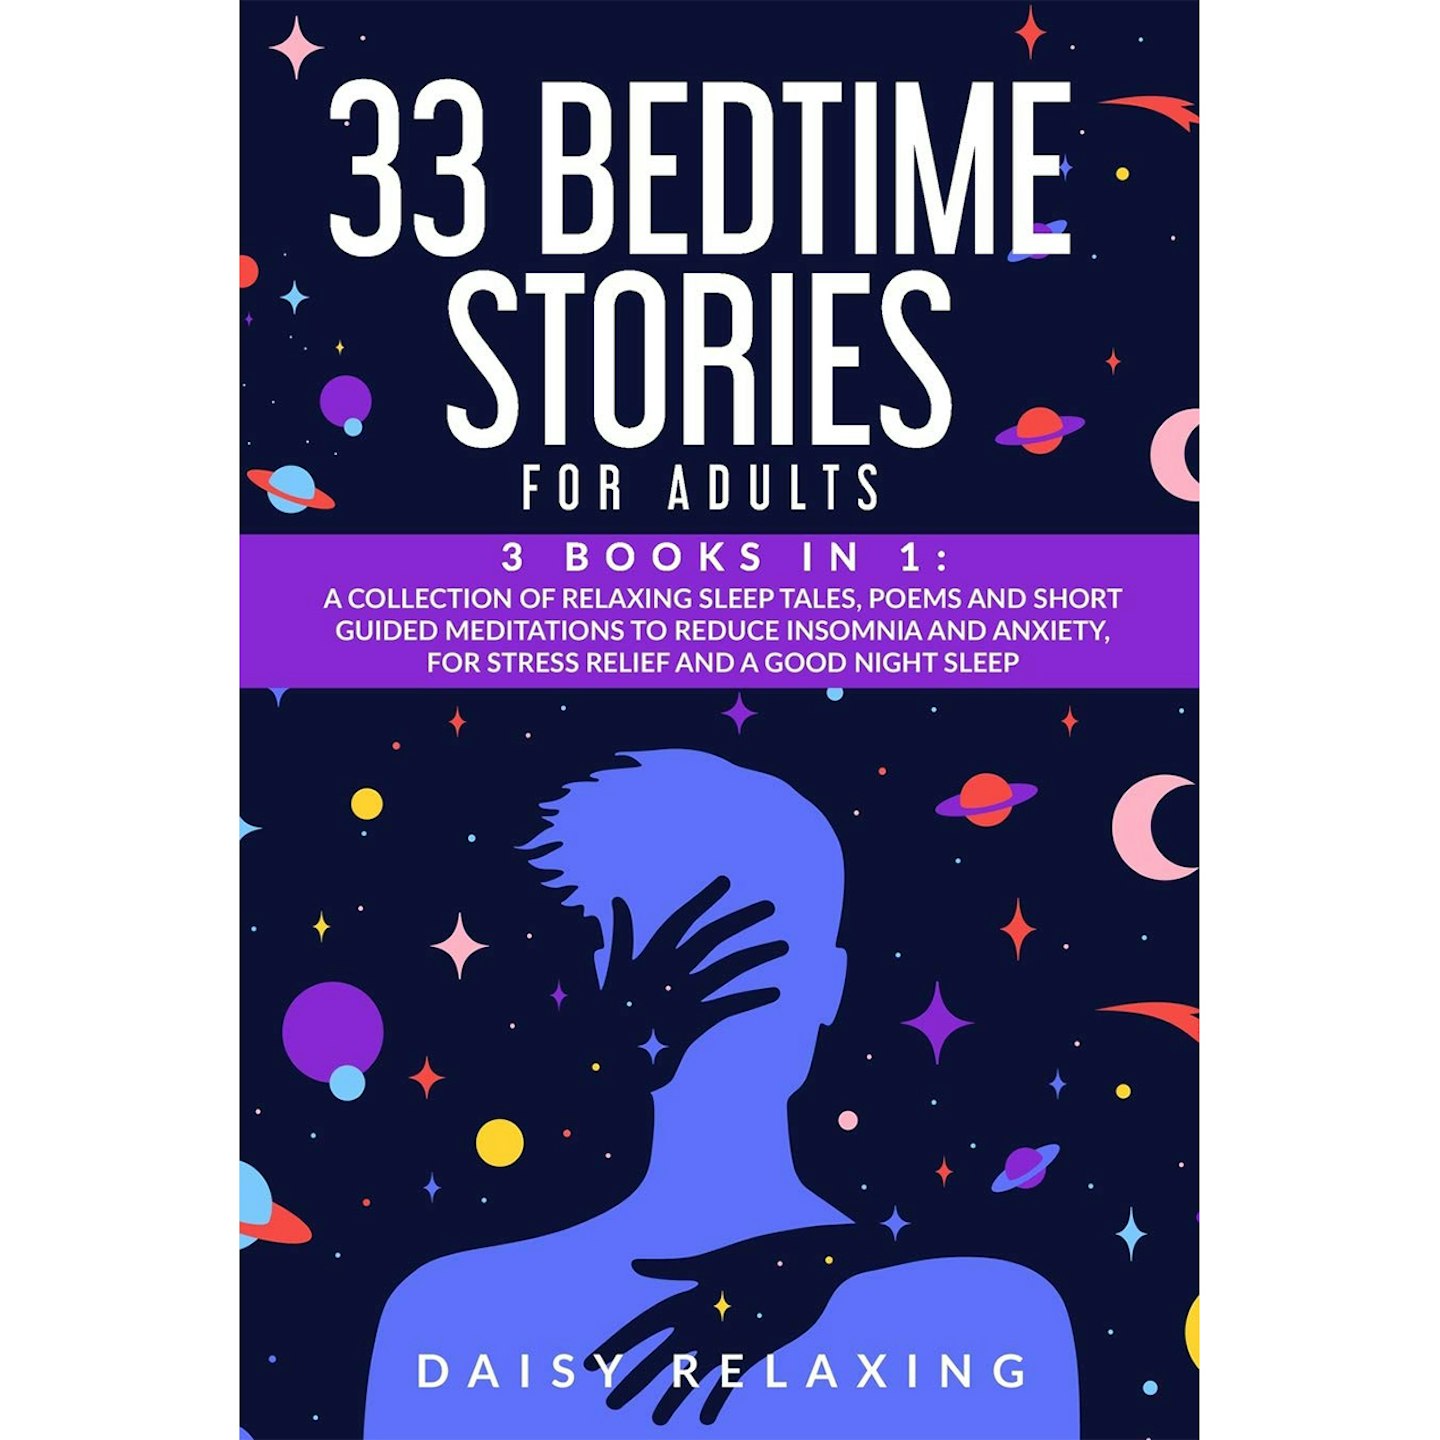 33 Bedtime Stories for Adults